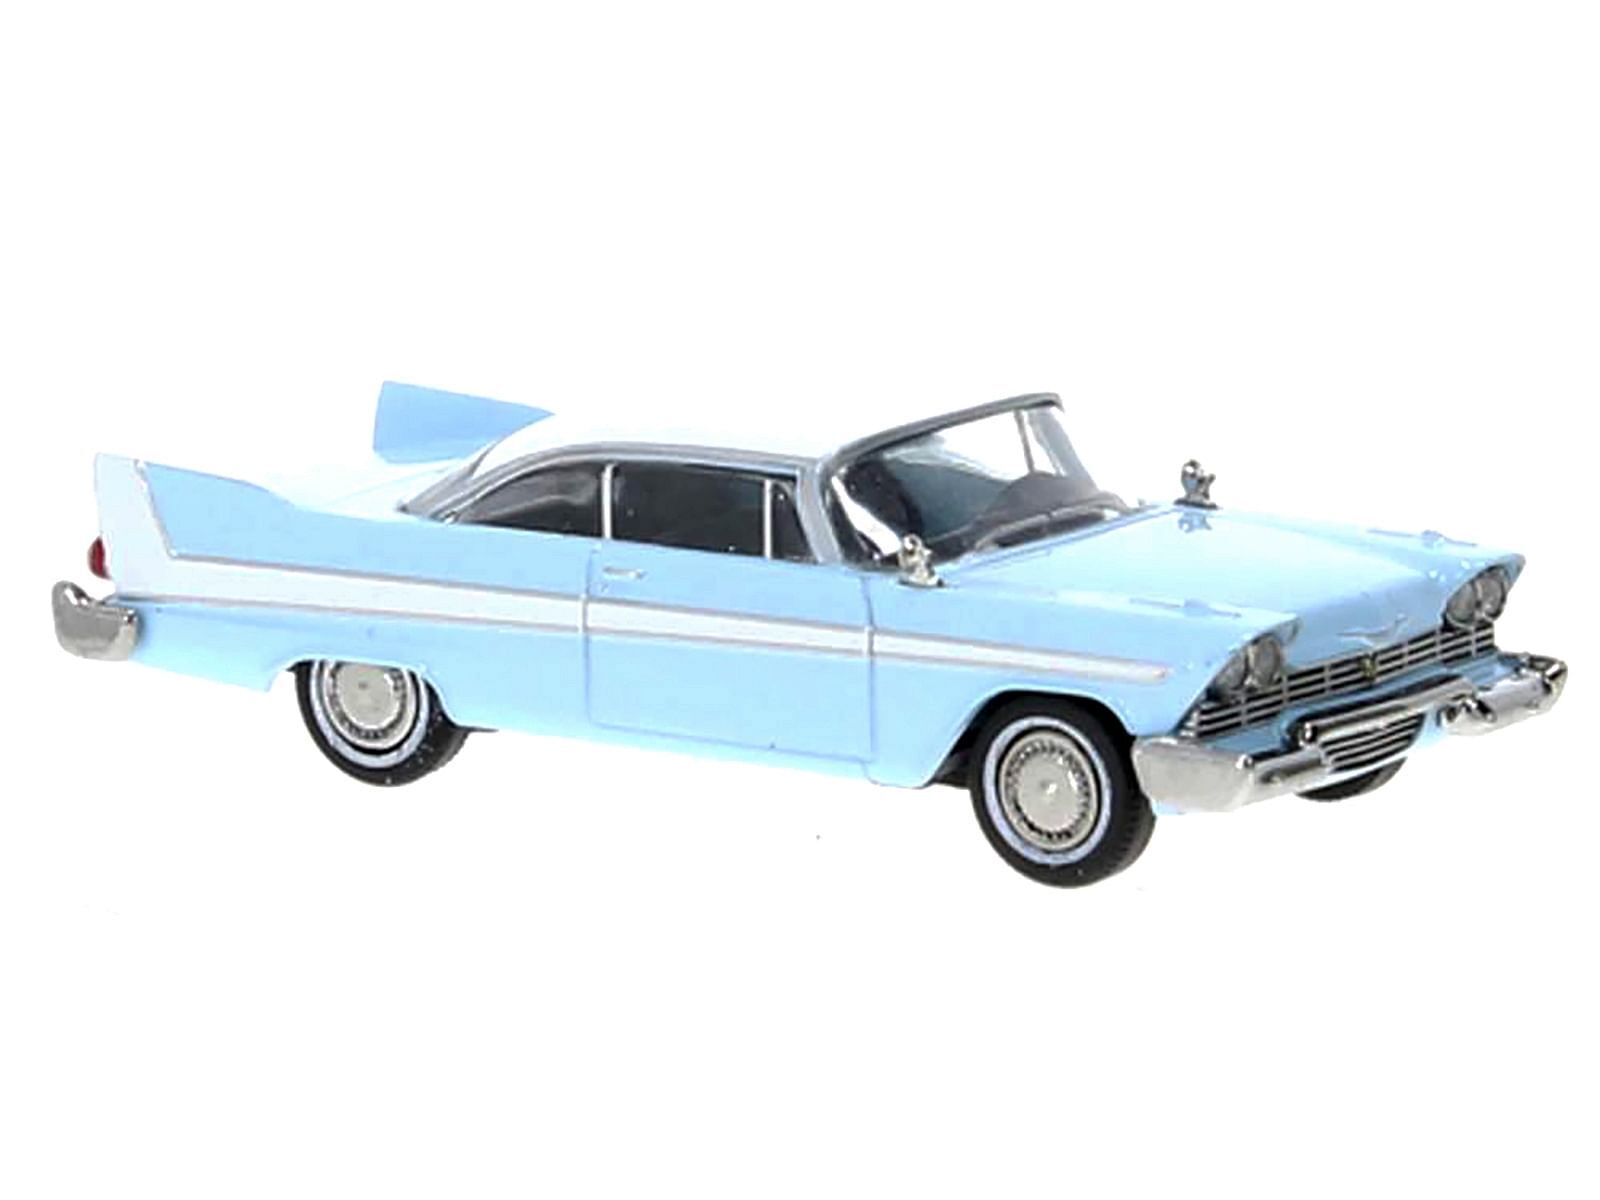 1958 Plymouth Fury Light Blue with White Top 1/87 (HO) Scale Model Car by Breki